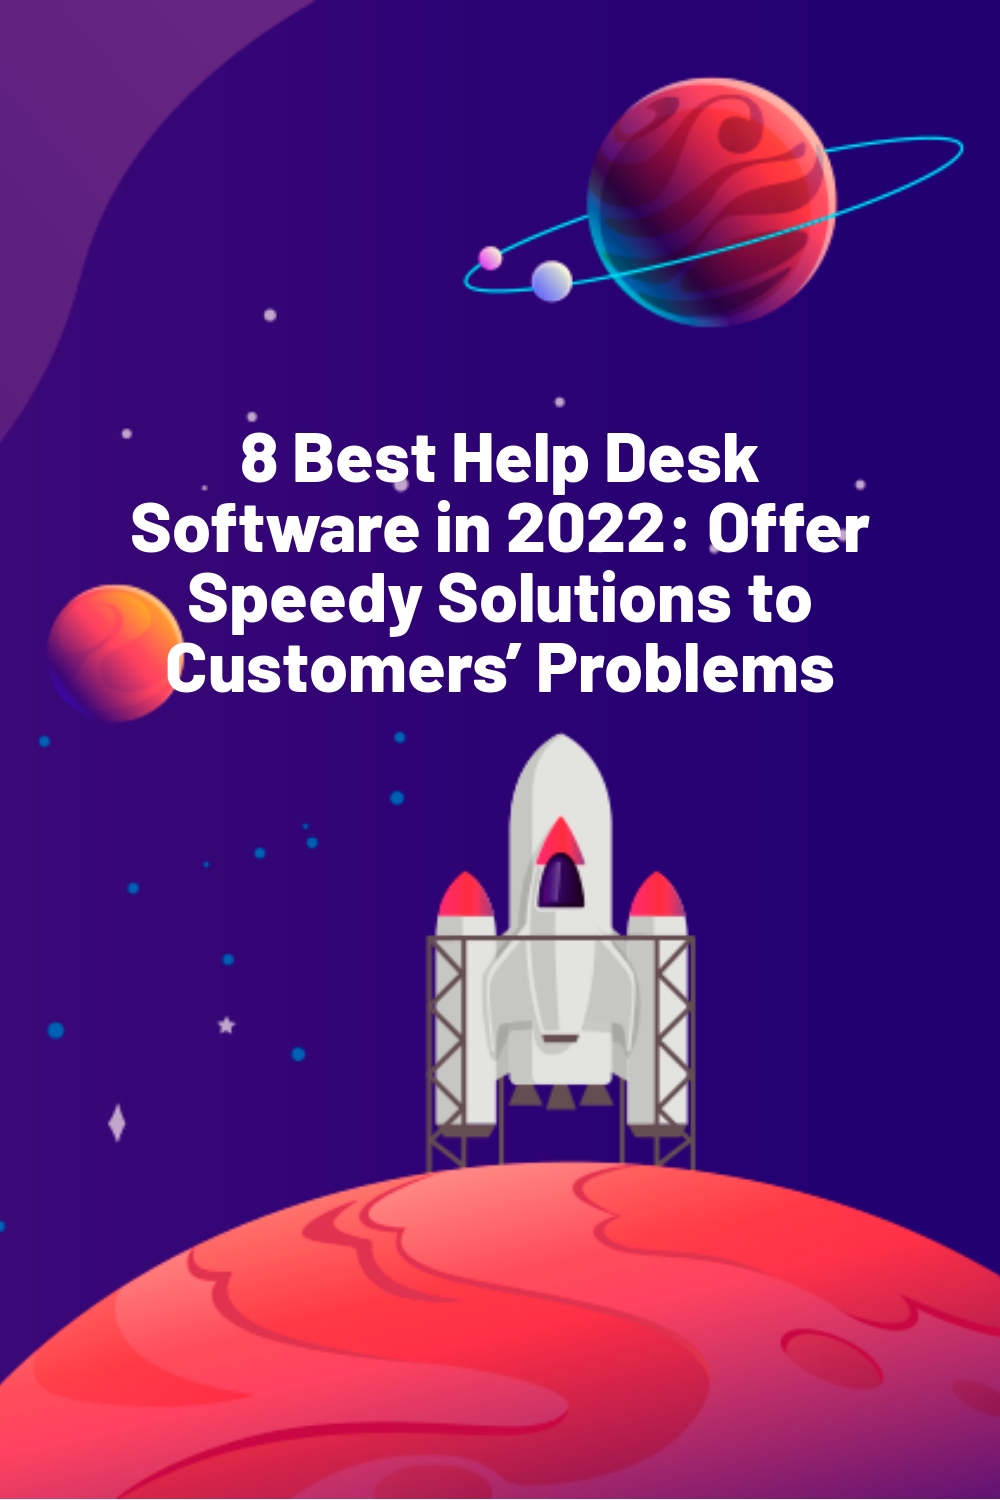 8 Best Help Desk Software in 2022: Offer Speedy Solutions to Customers’ Problems